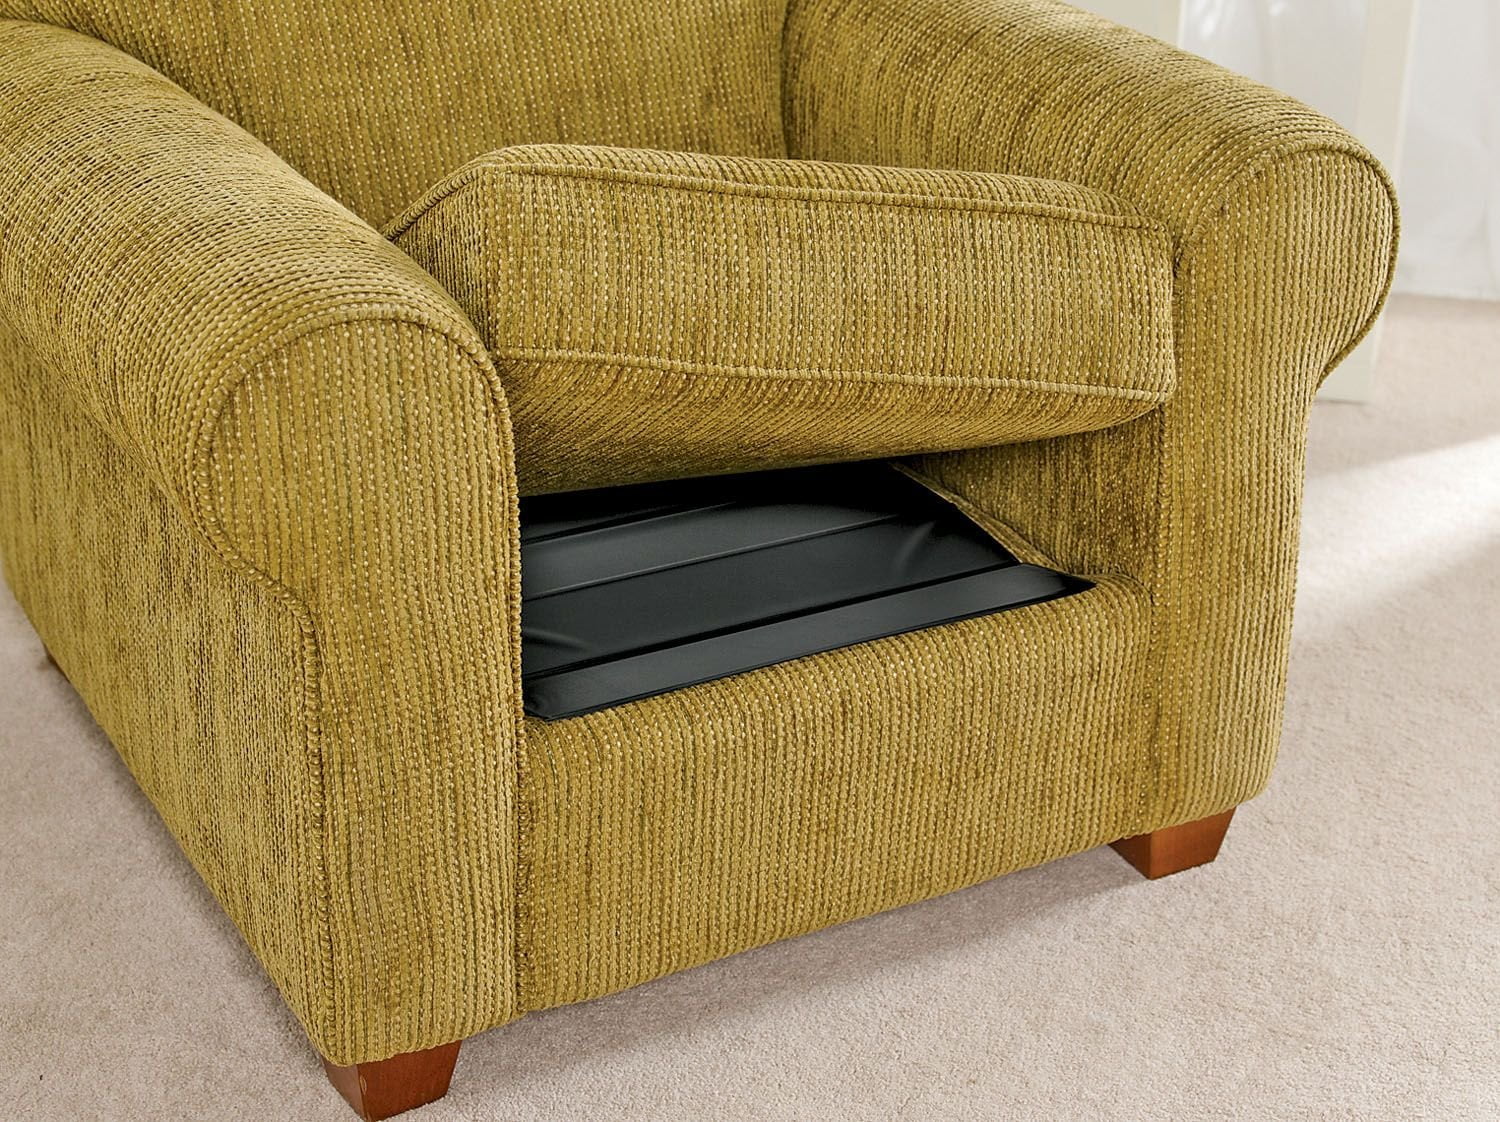 Sagging Sofa Cushion Support Seat, What Can I Put Under Sofa Cushions For Support